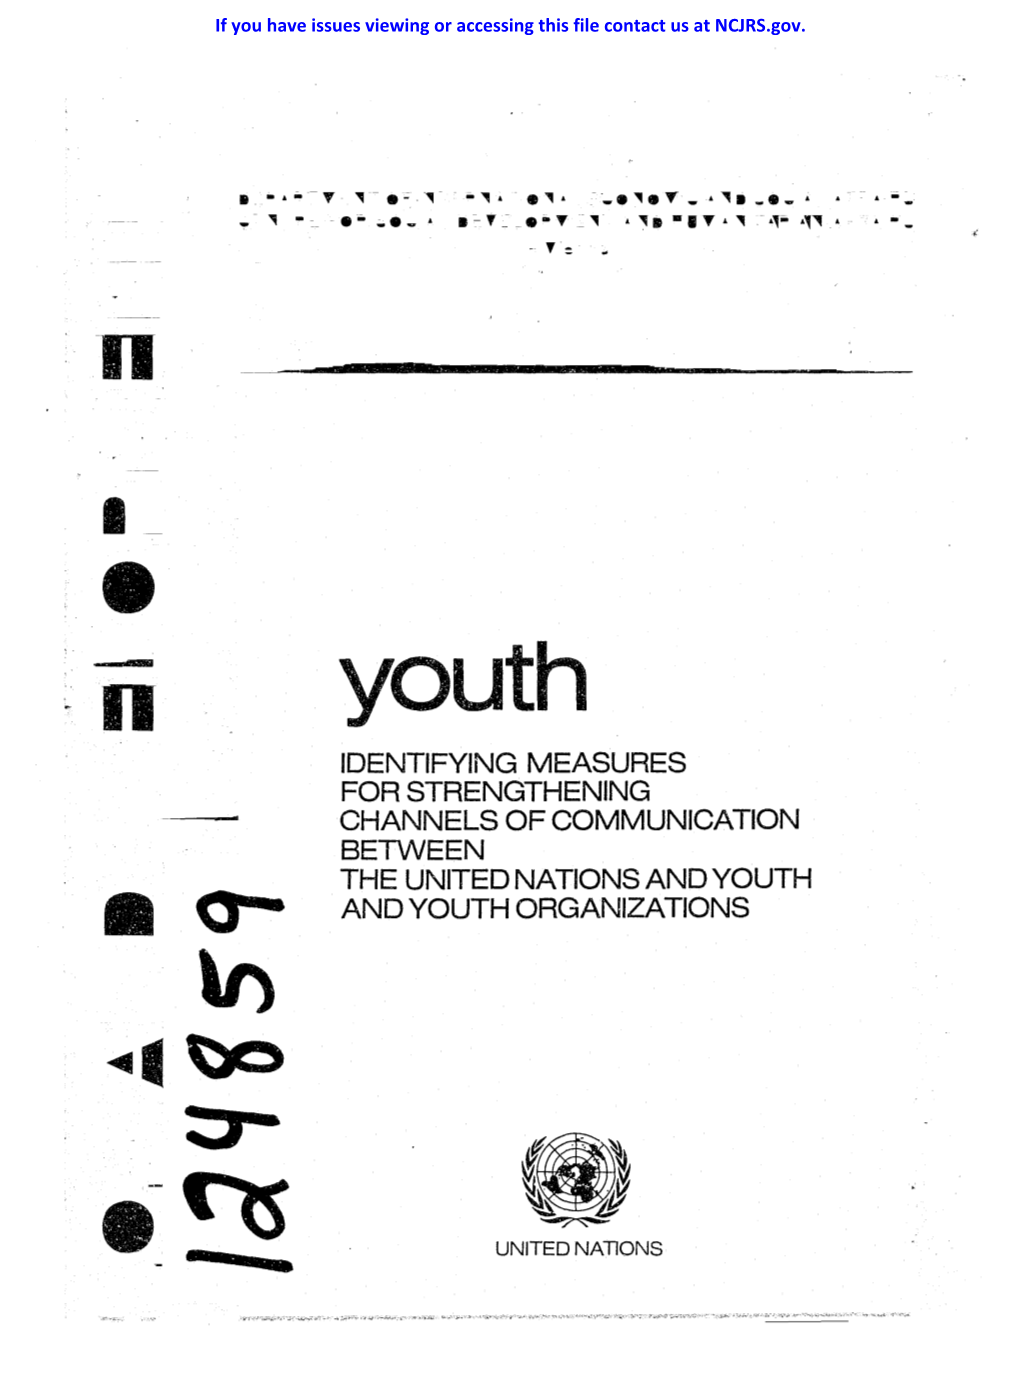 For Strengthening Channels of Communication Between the United Nations and Youth and Youth Organizations